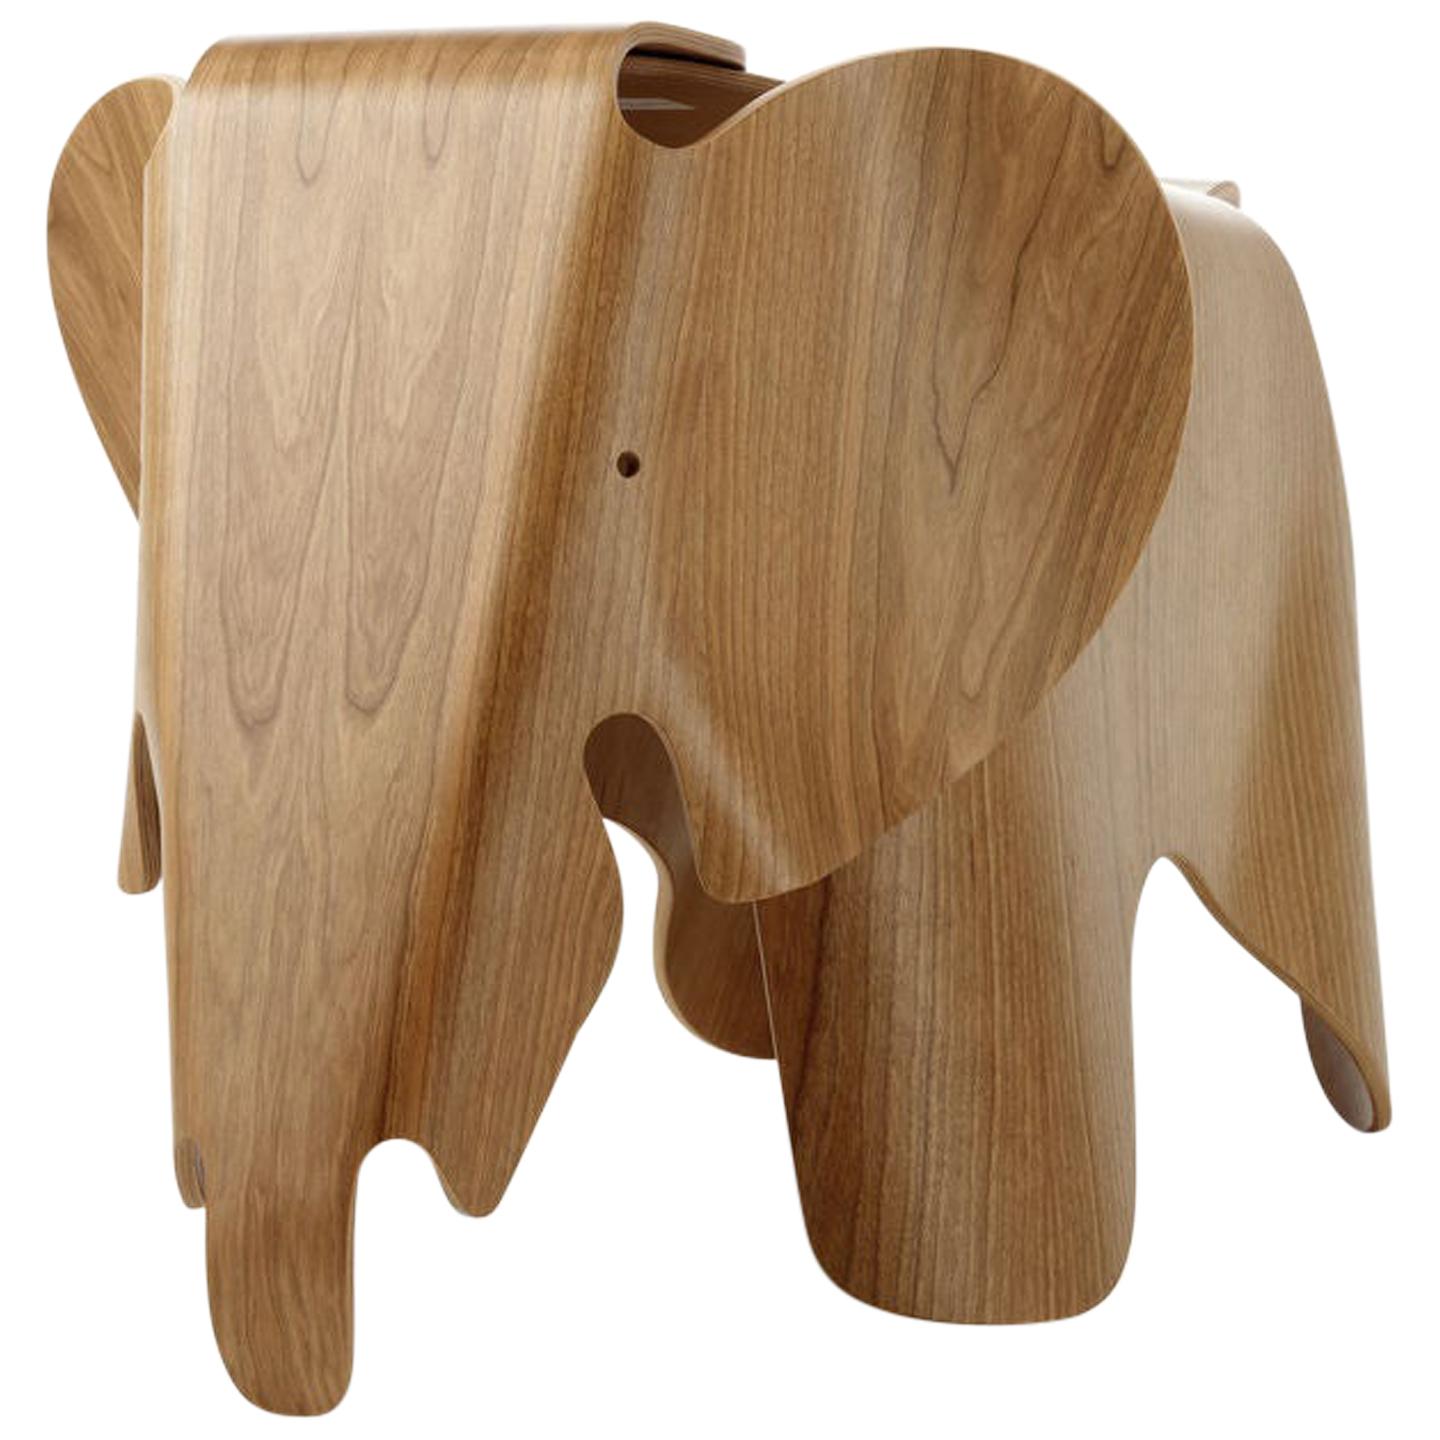 Vitra Eames Elephant in Plywood by Charles & Ray Eames For Sale